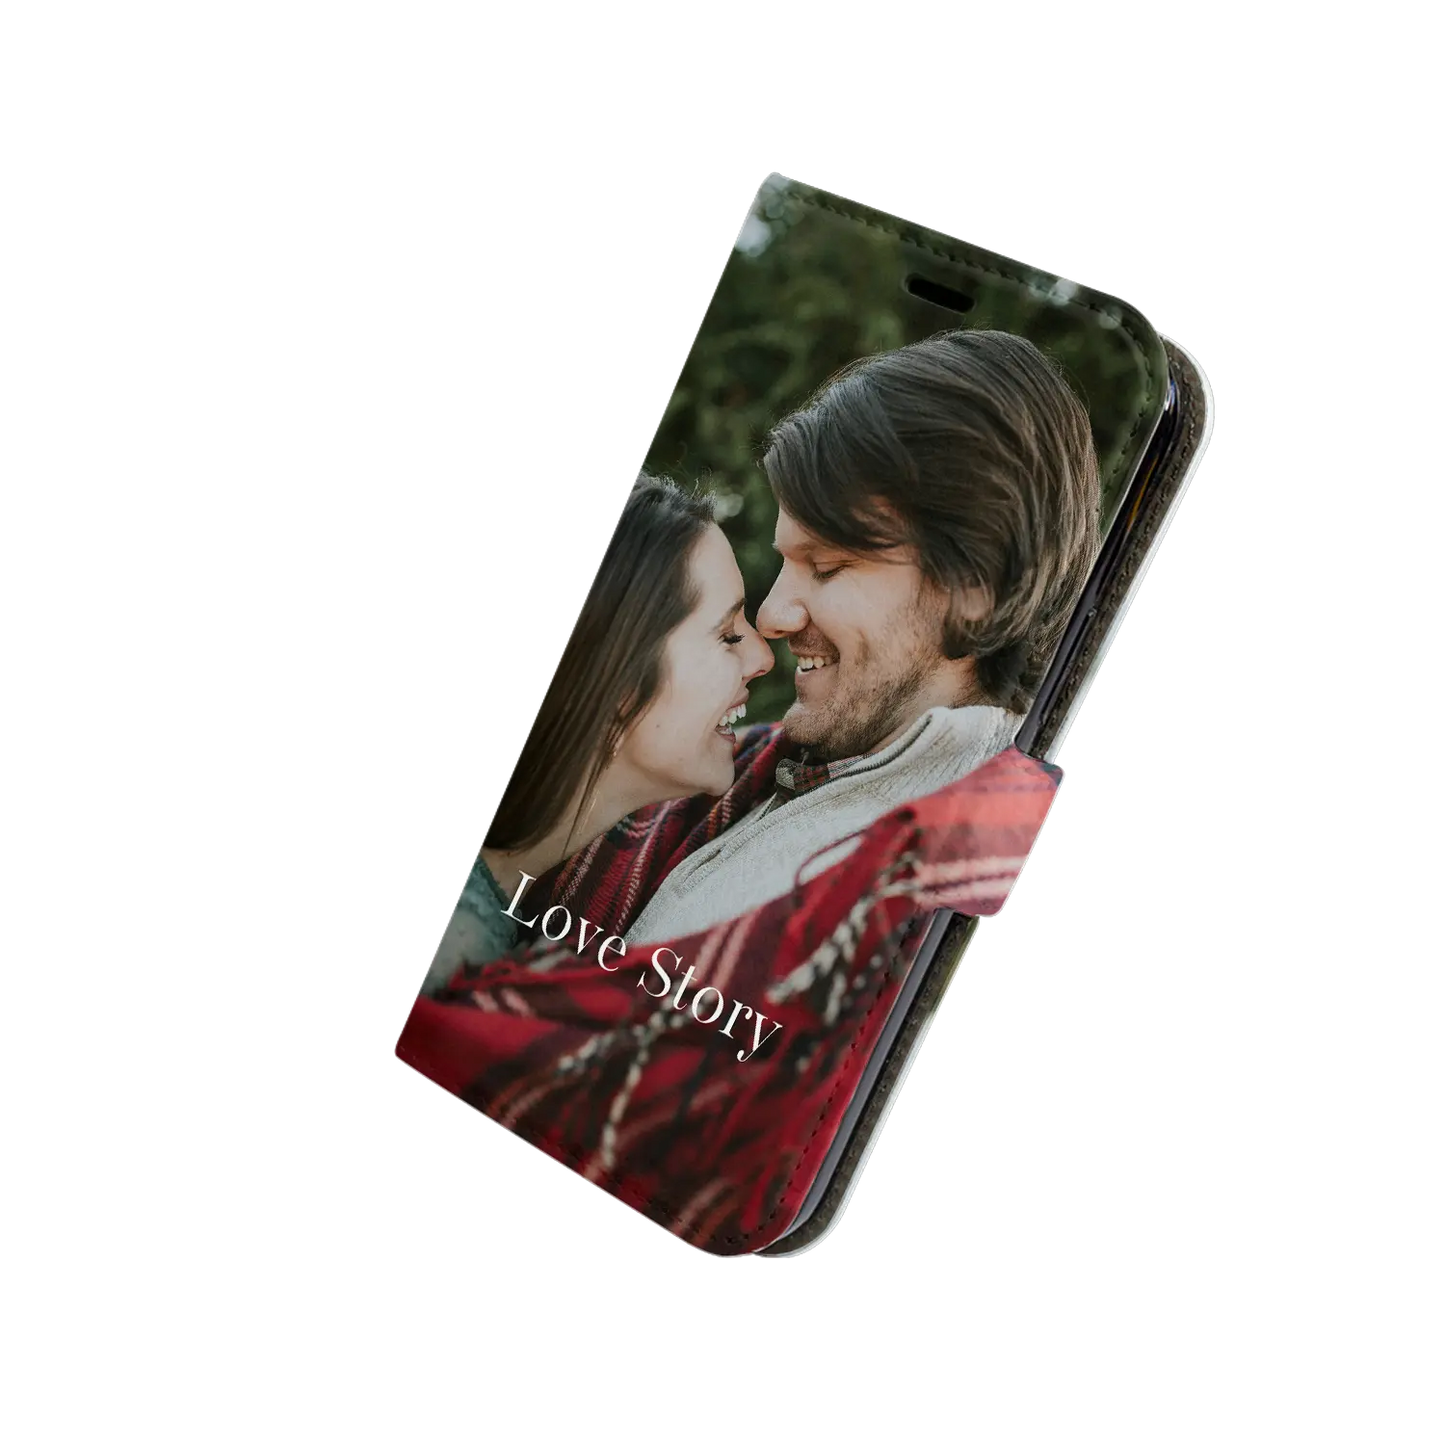 1 Photo - Personalised Galaxy S Case